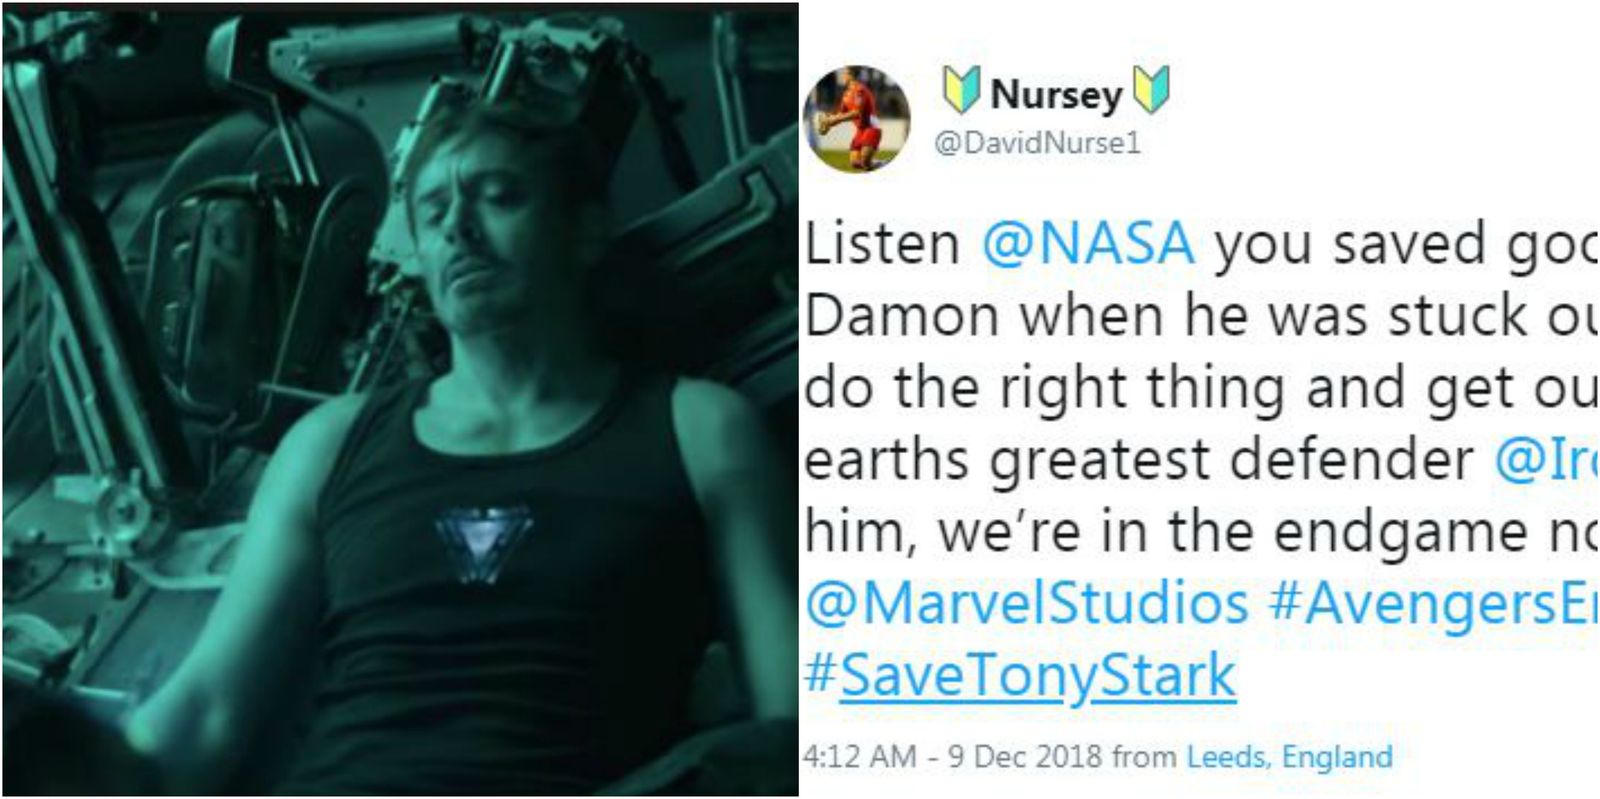 Avengers Fans Go Crazy On Twitter As They Request NASA To Save Tony Stark